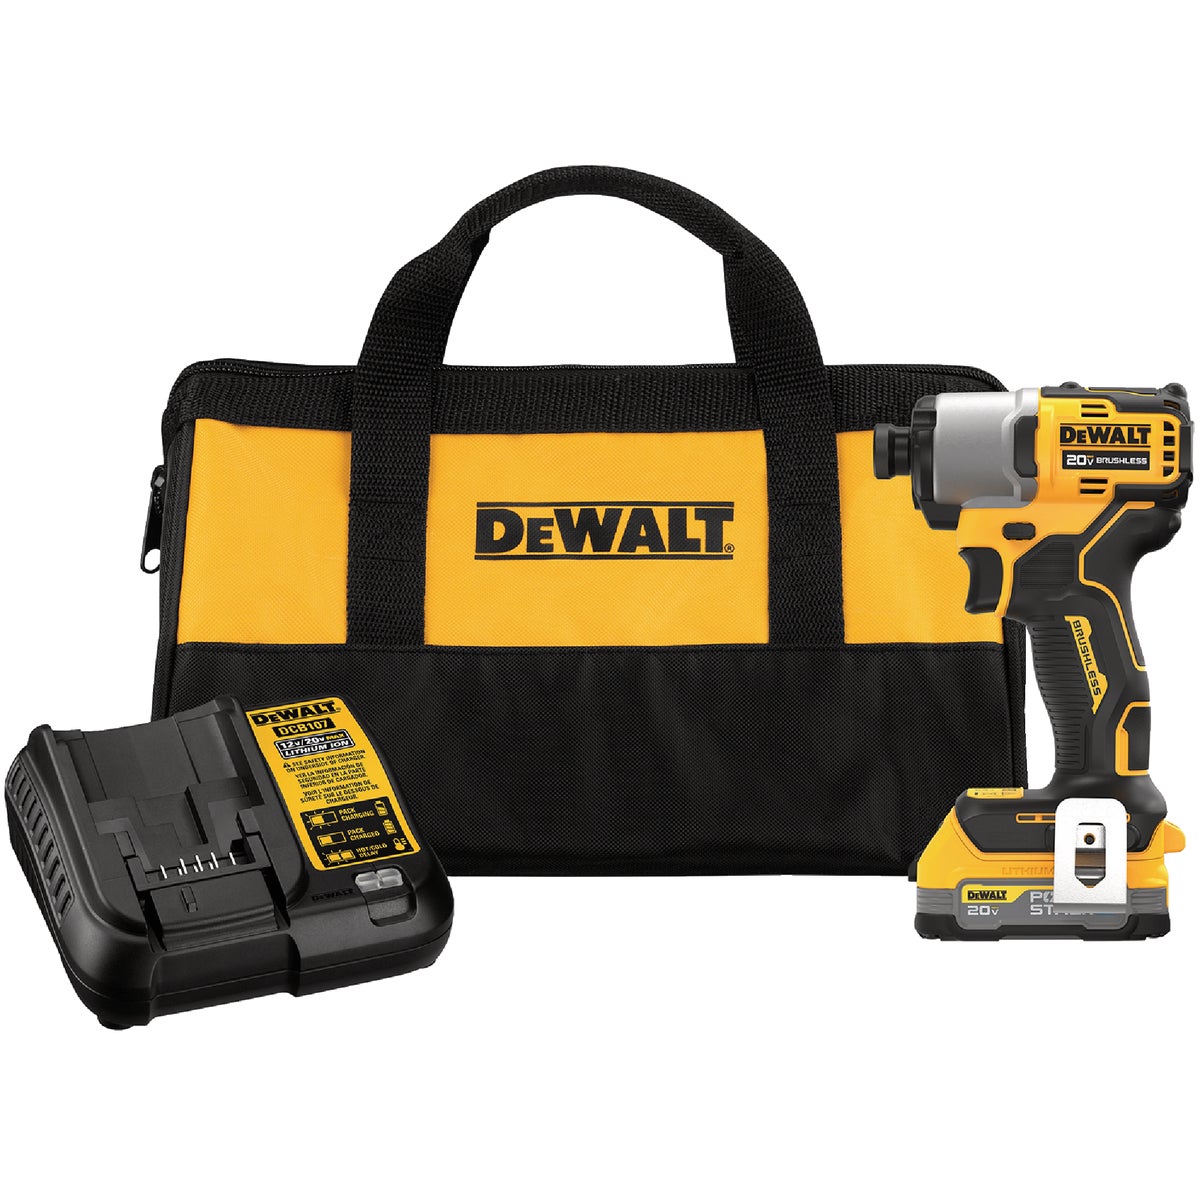 DEWALT 20-Volt MAX Lithium-Ion Brushless 1/4 In. Hex Compact Cordless Impact Driver Kit with POWERSTACK Battery